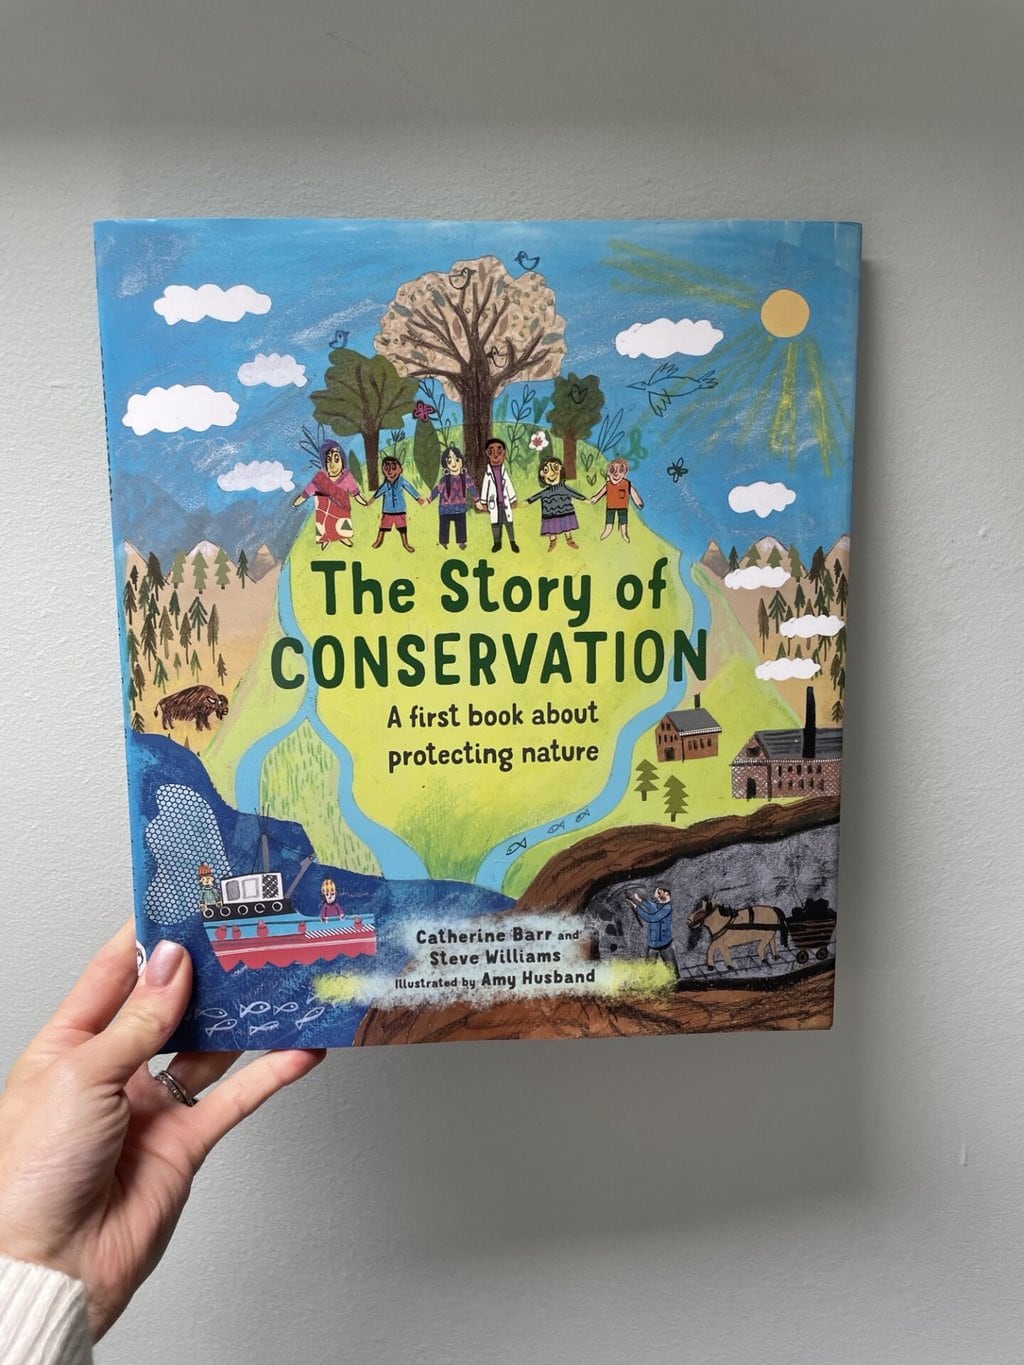 The Story of Conservation - Catherine Barr and Steve Williams (